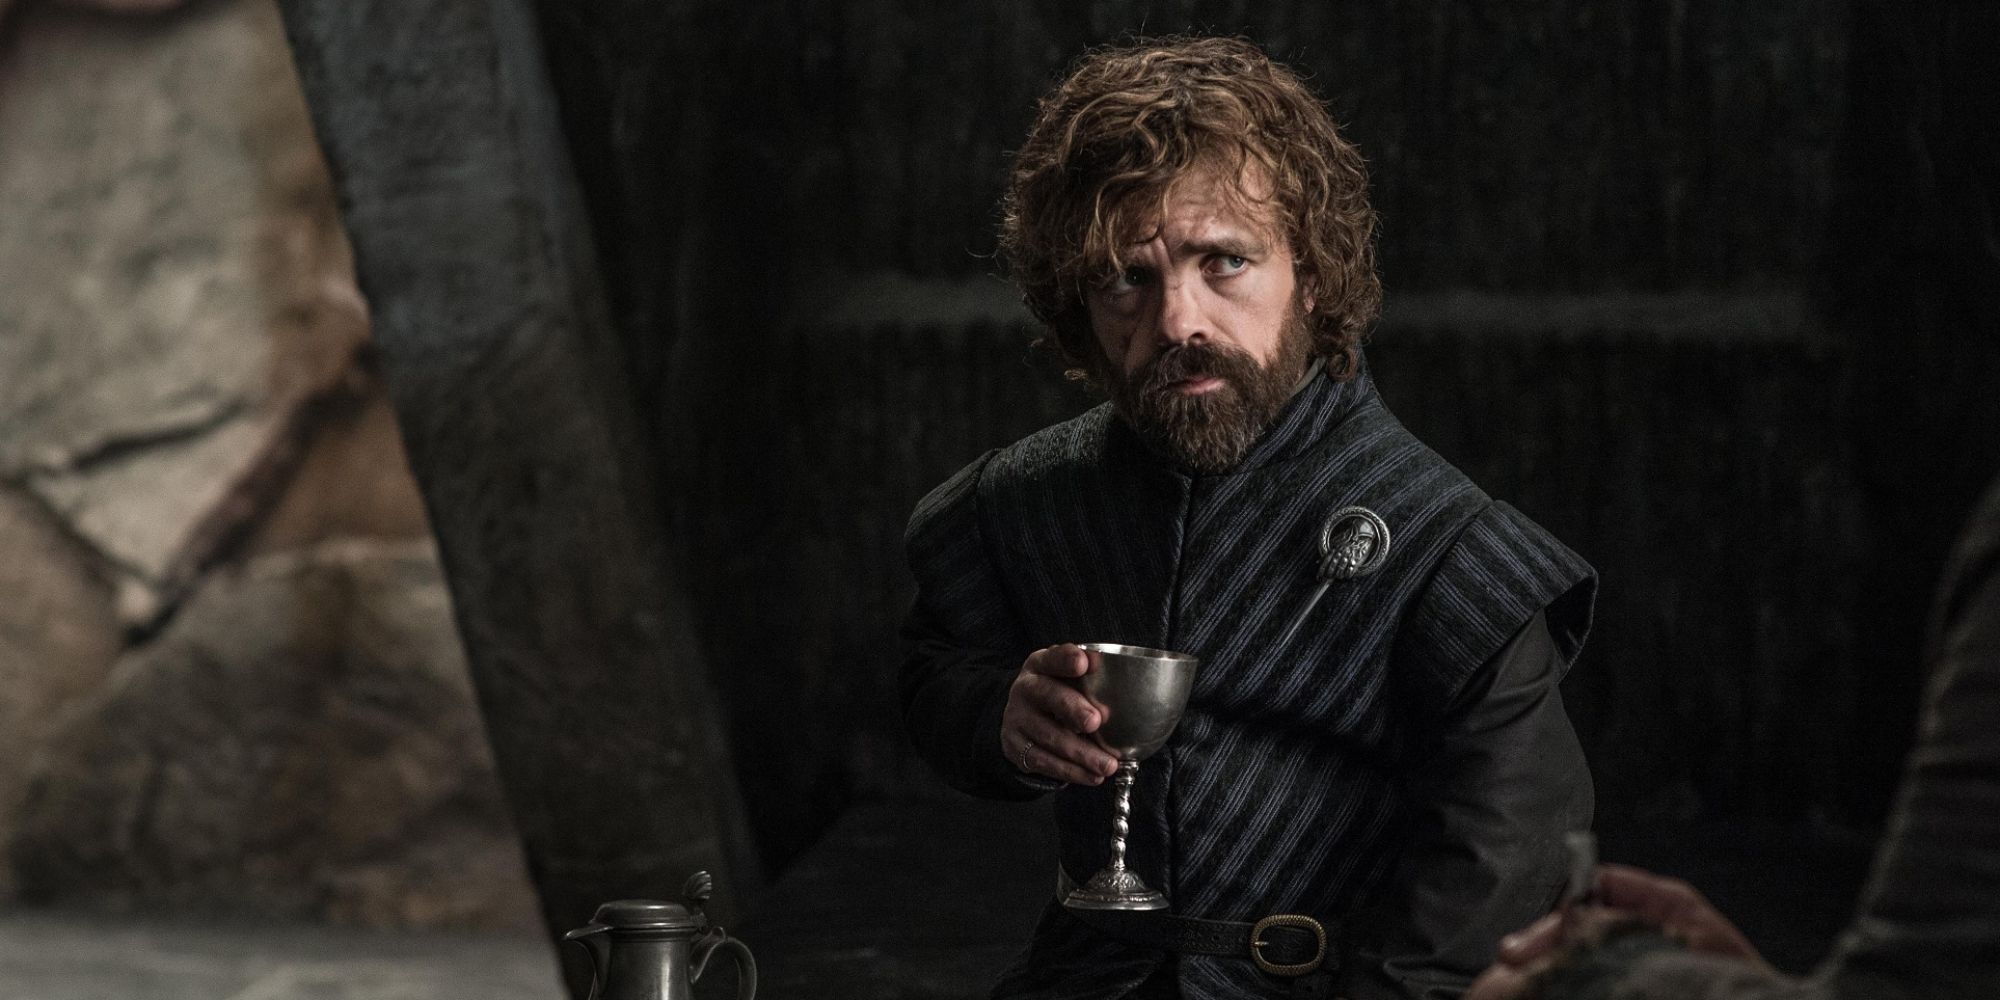 Peter Dinklage as Tyrion Lannister on Game of Thrones sits down to drink from a goblet.